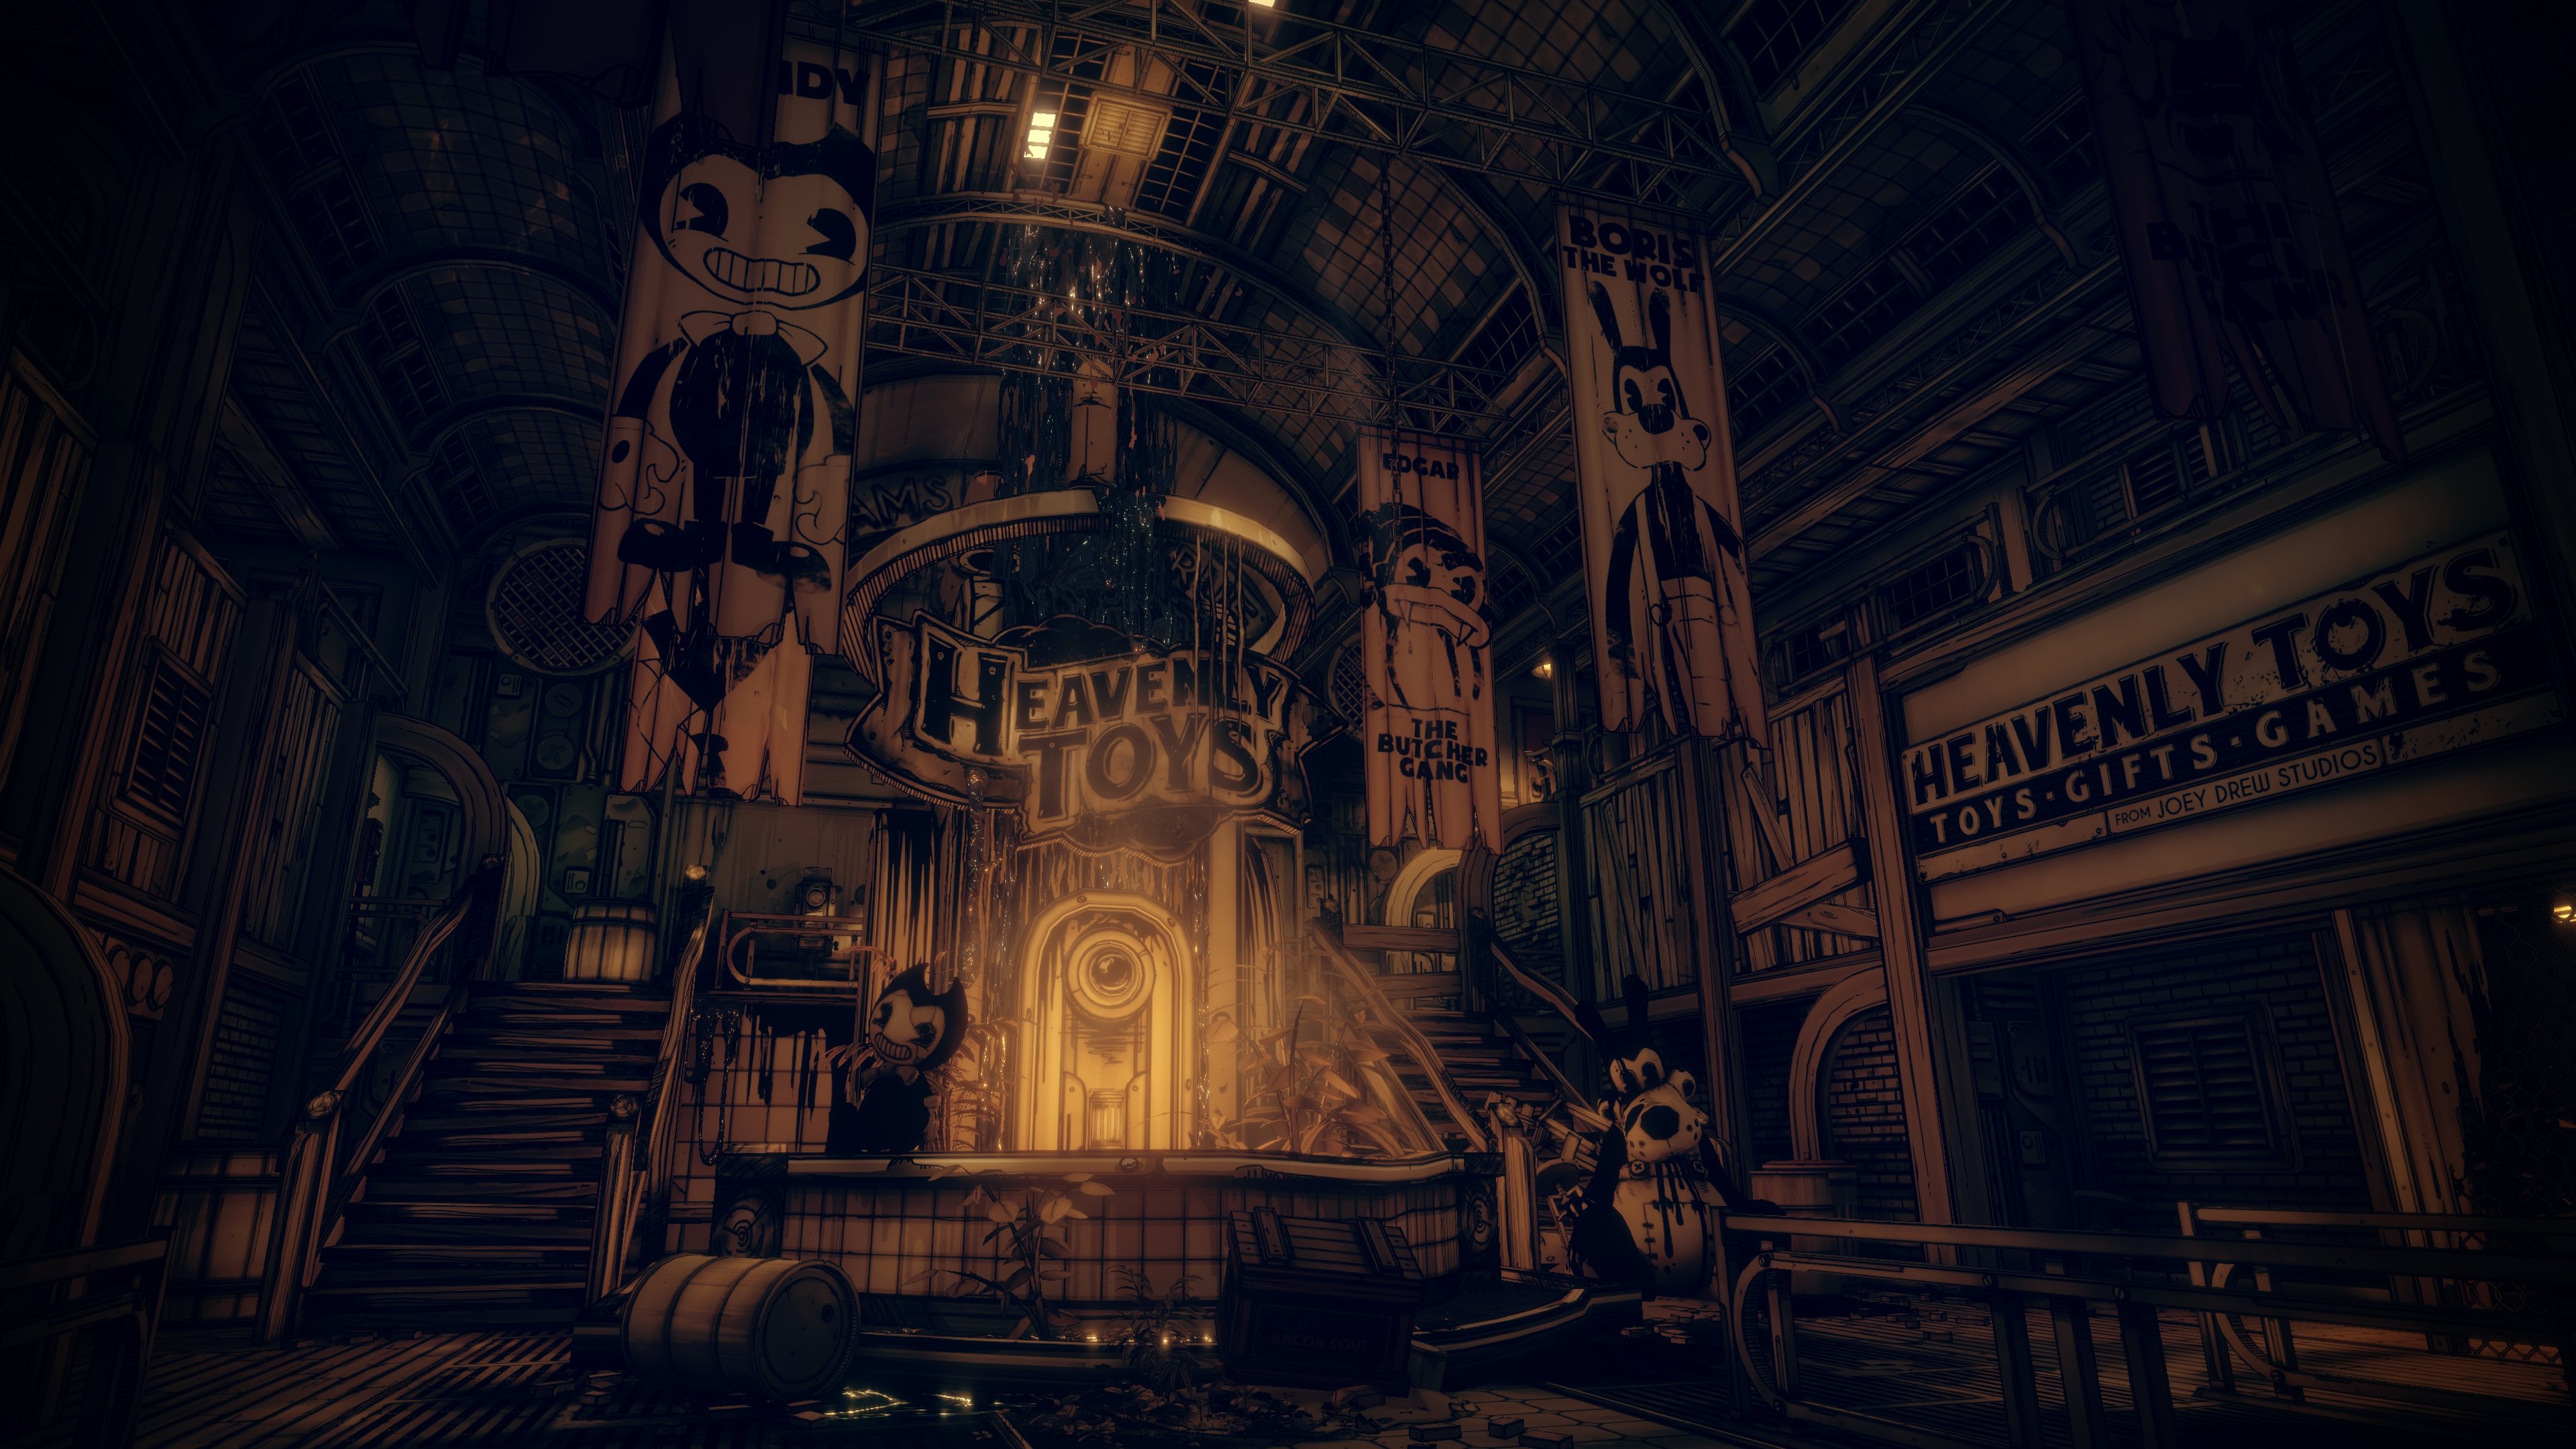 Bendy and the Dark Revival launches November 15 for PC, later for  PlayStation and Xbox - Gematsu